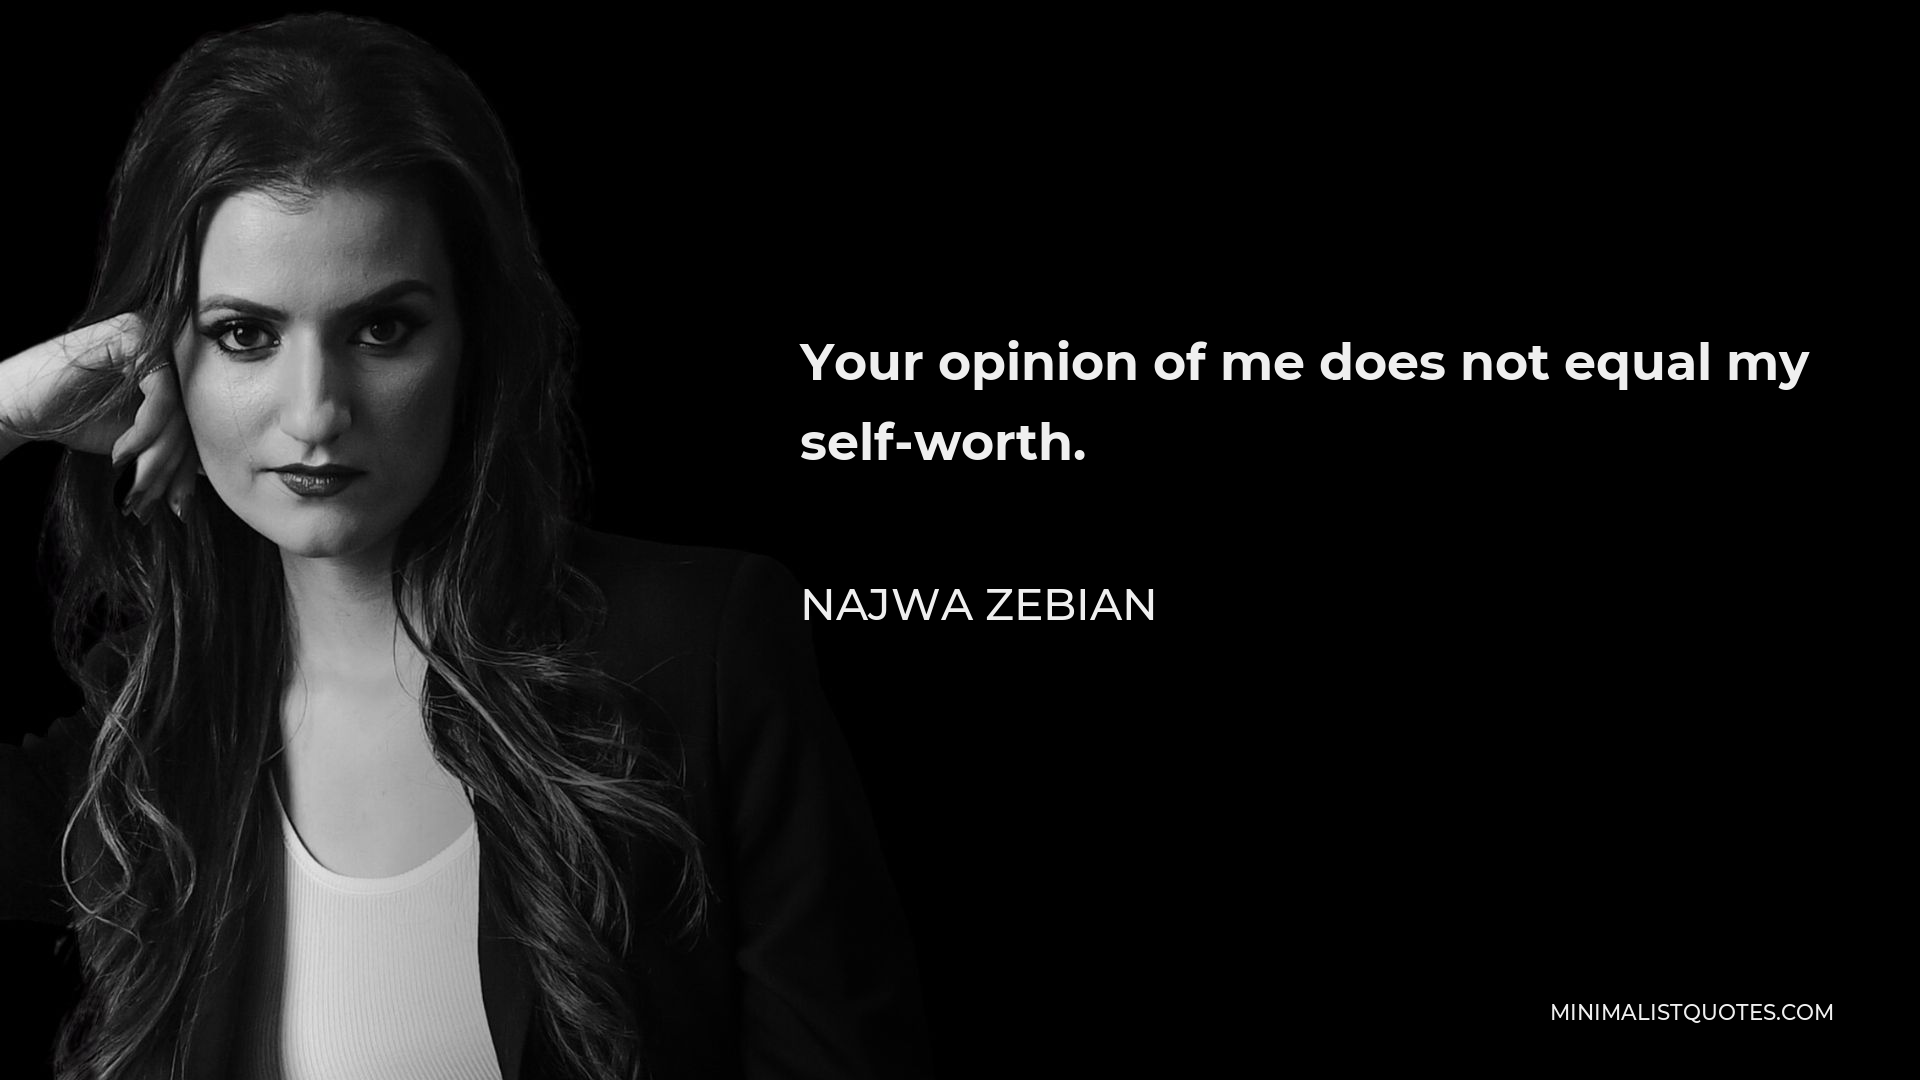 Najwa Zebian Quote - Your opinion of me does not equal my self-worth.